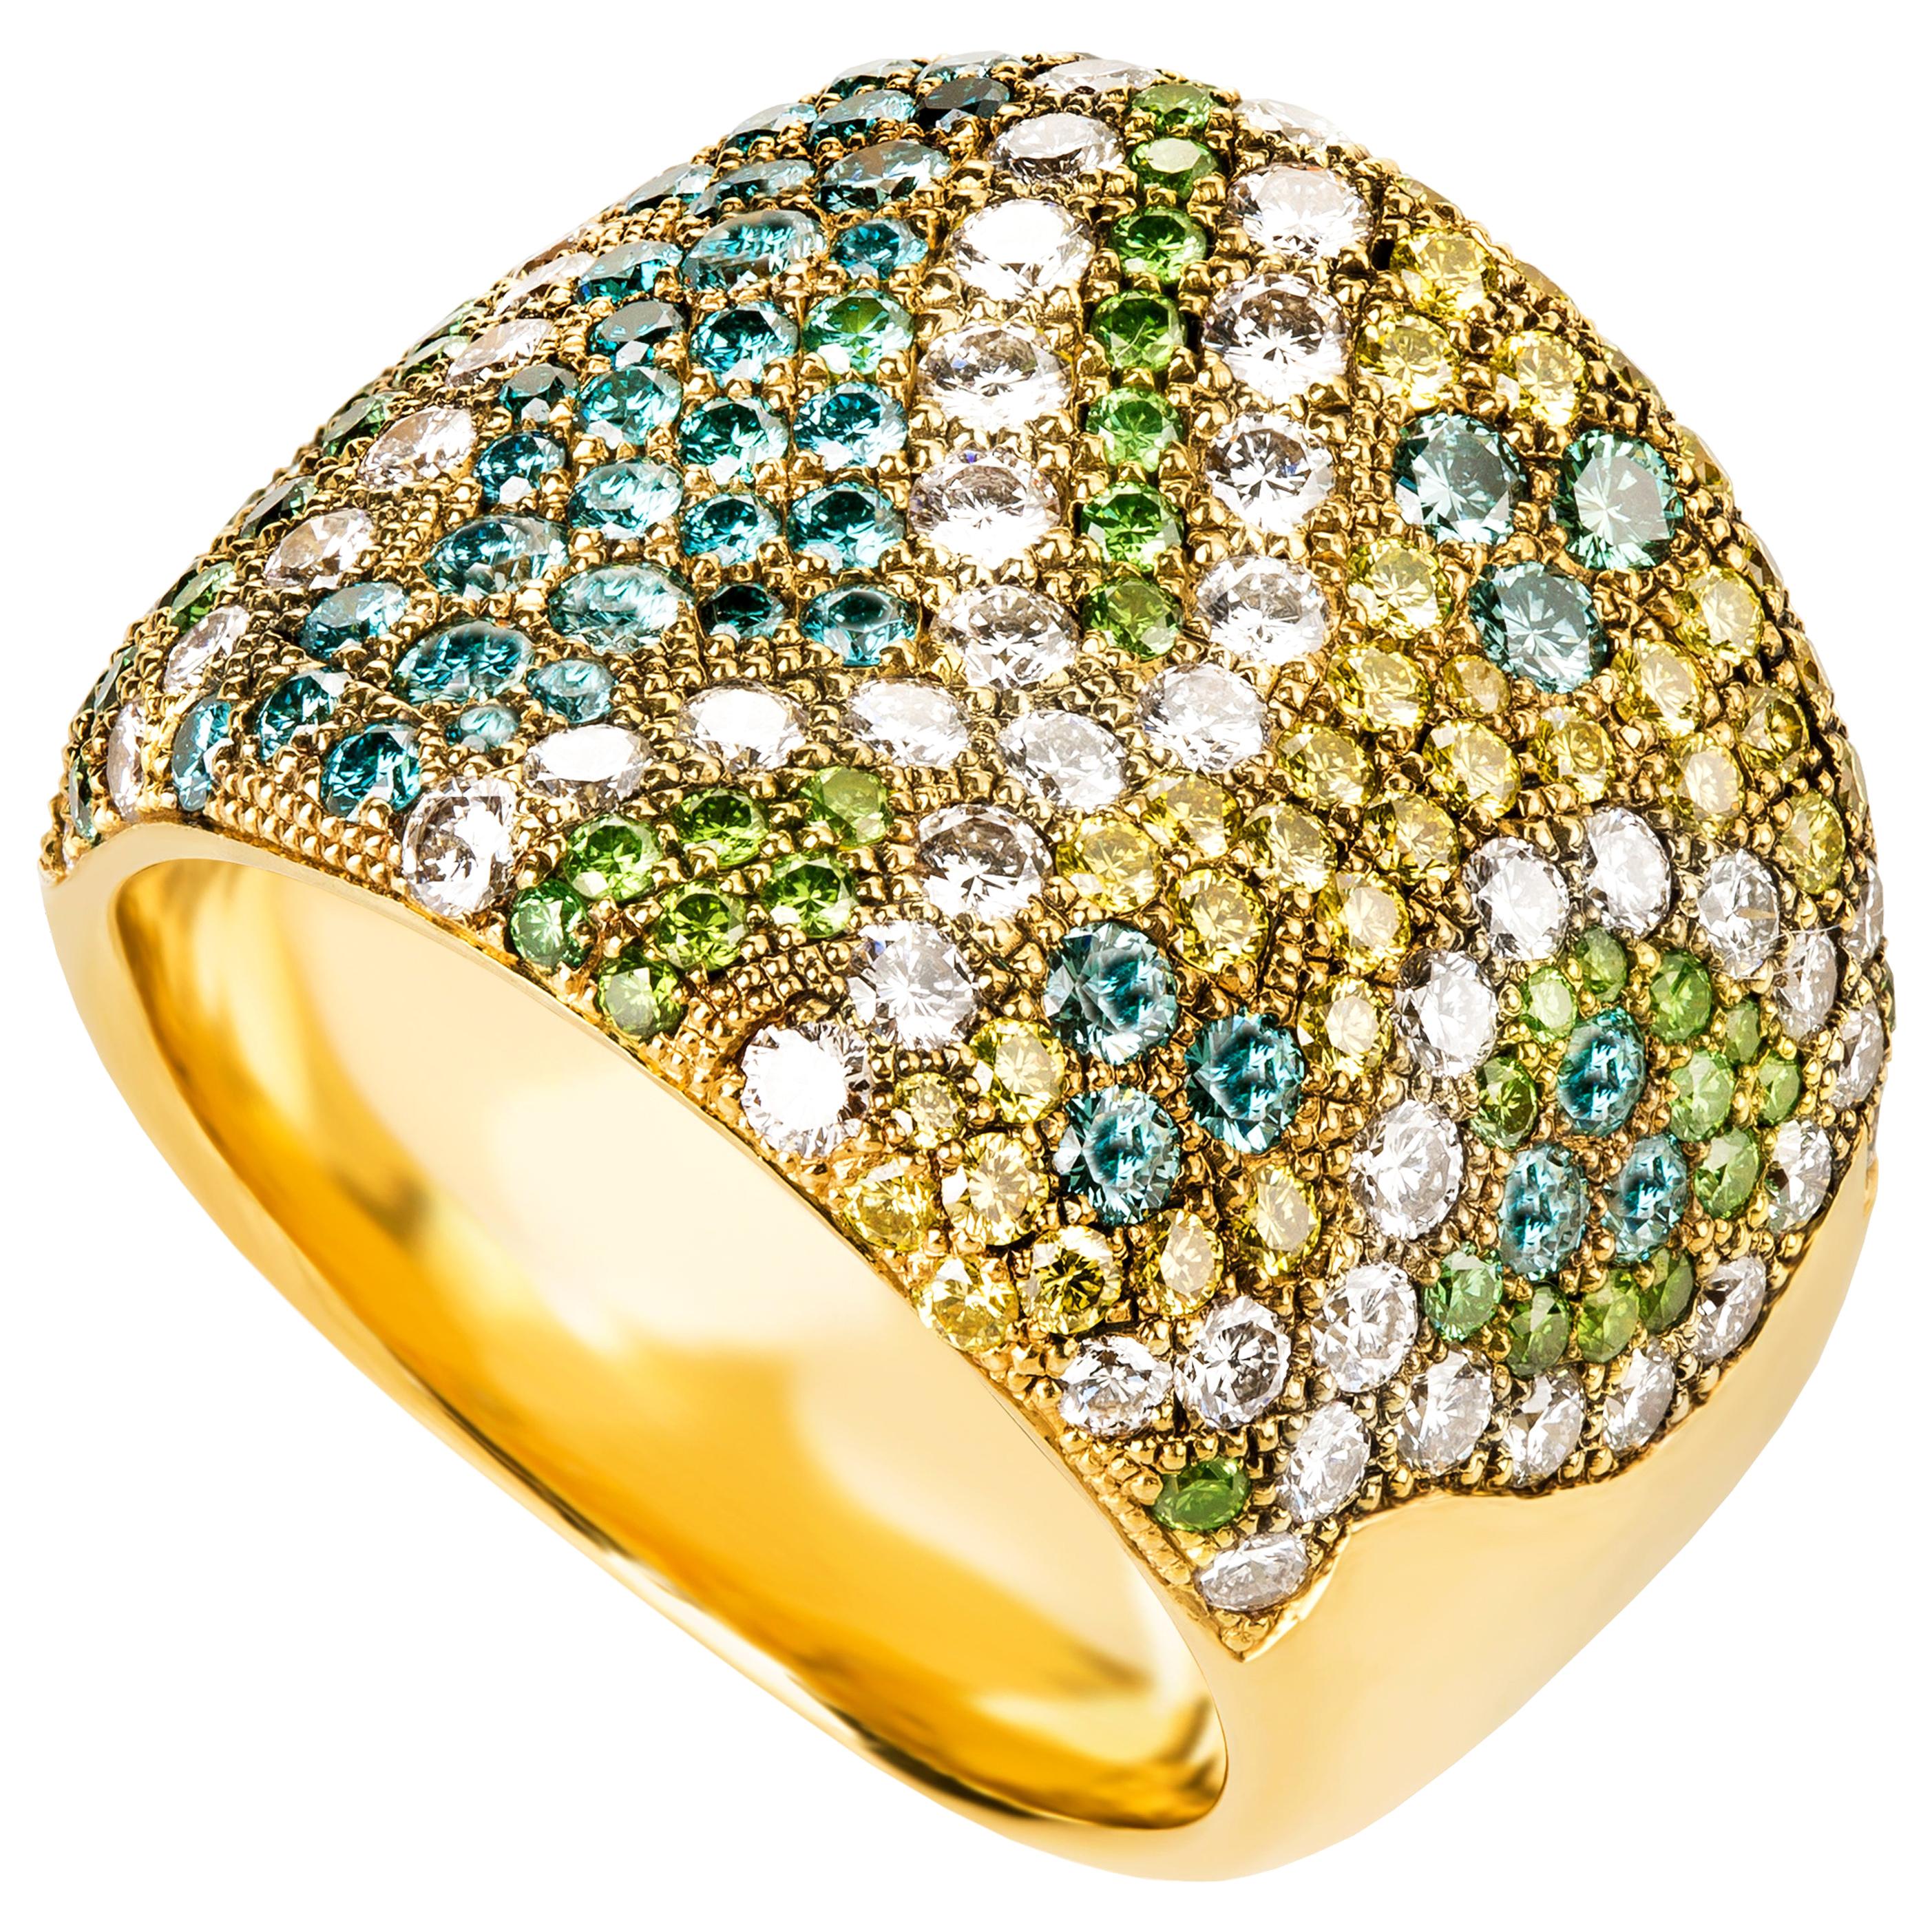 Rosior one-off Fancy Color Diamond Cocktail Ring set in Yellow Gold 